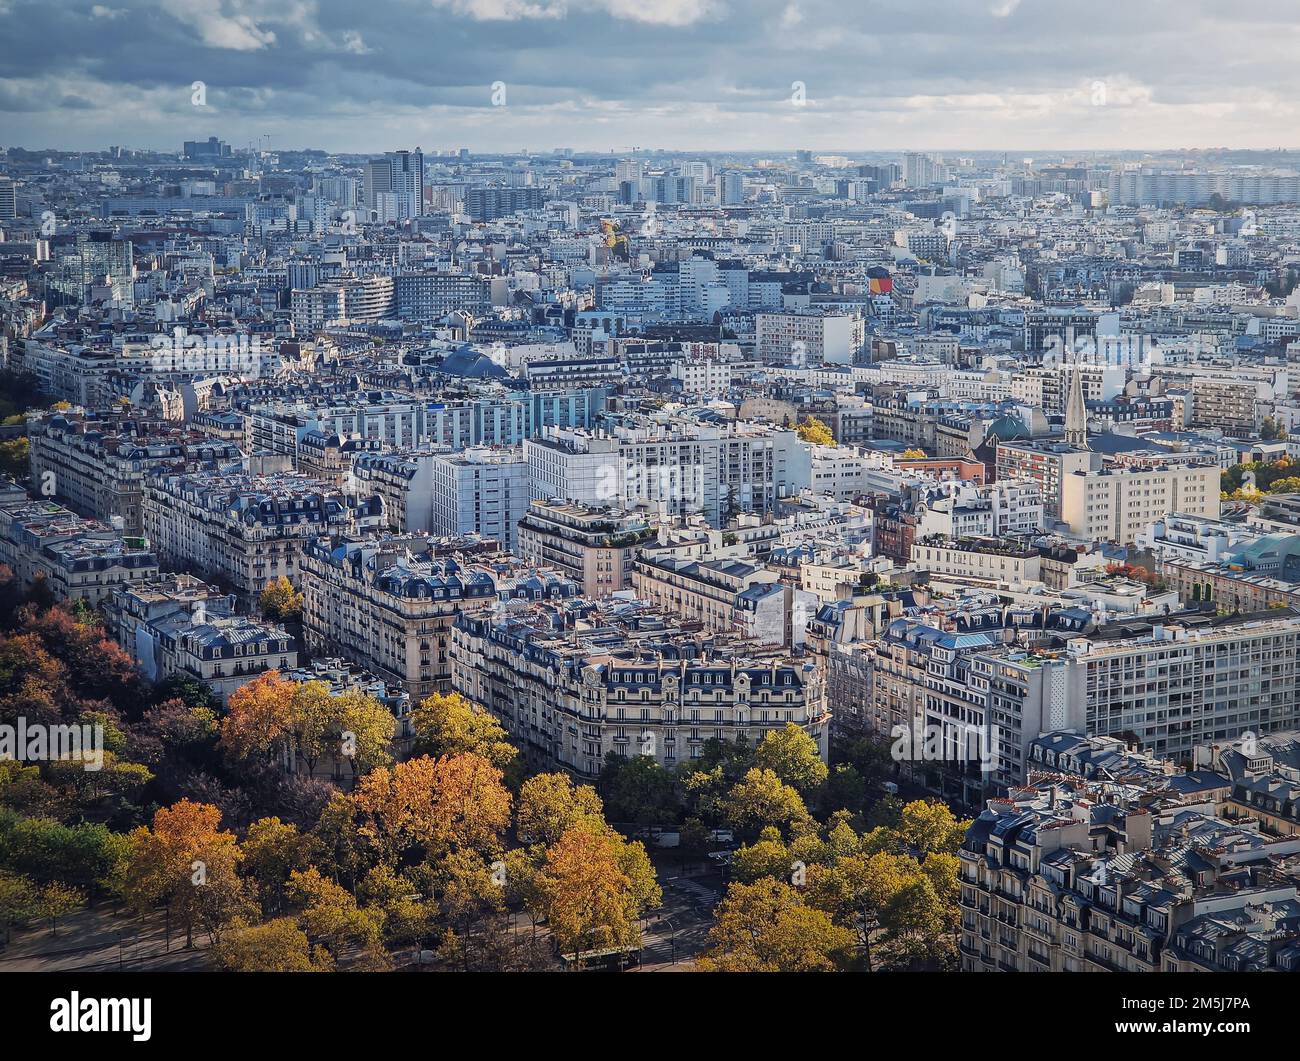 Paris cityscape view from the Eiffel tower height, France. Fall season scene with colored trees Stock Photo